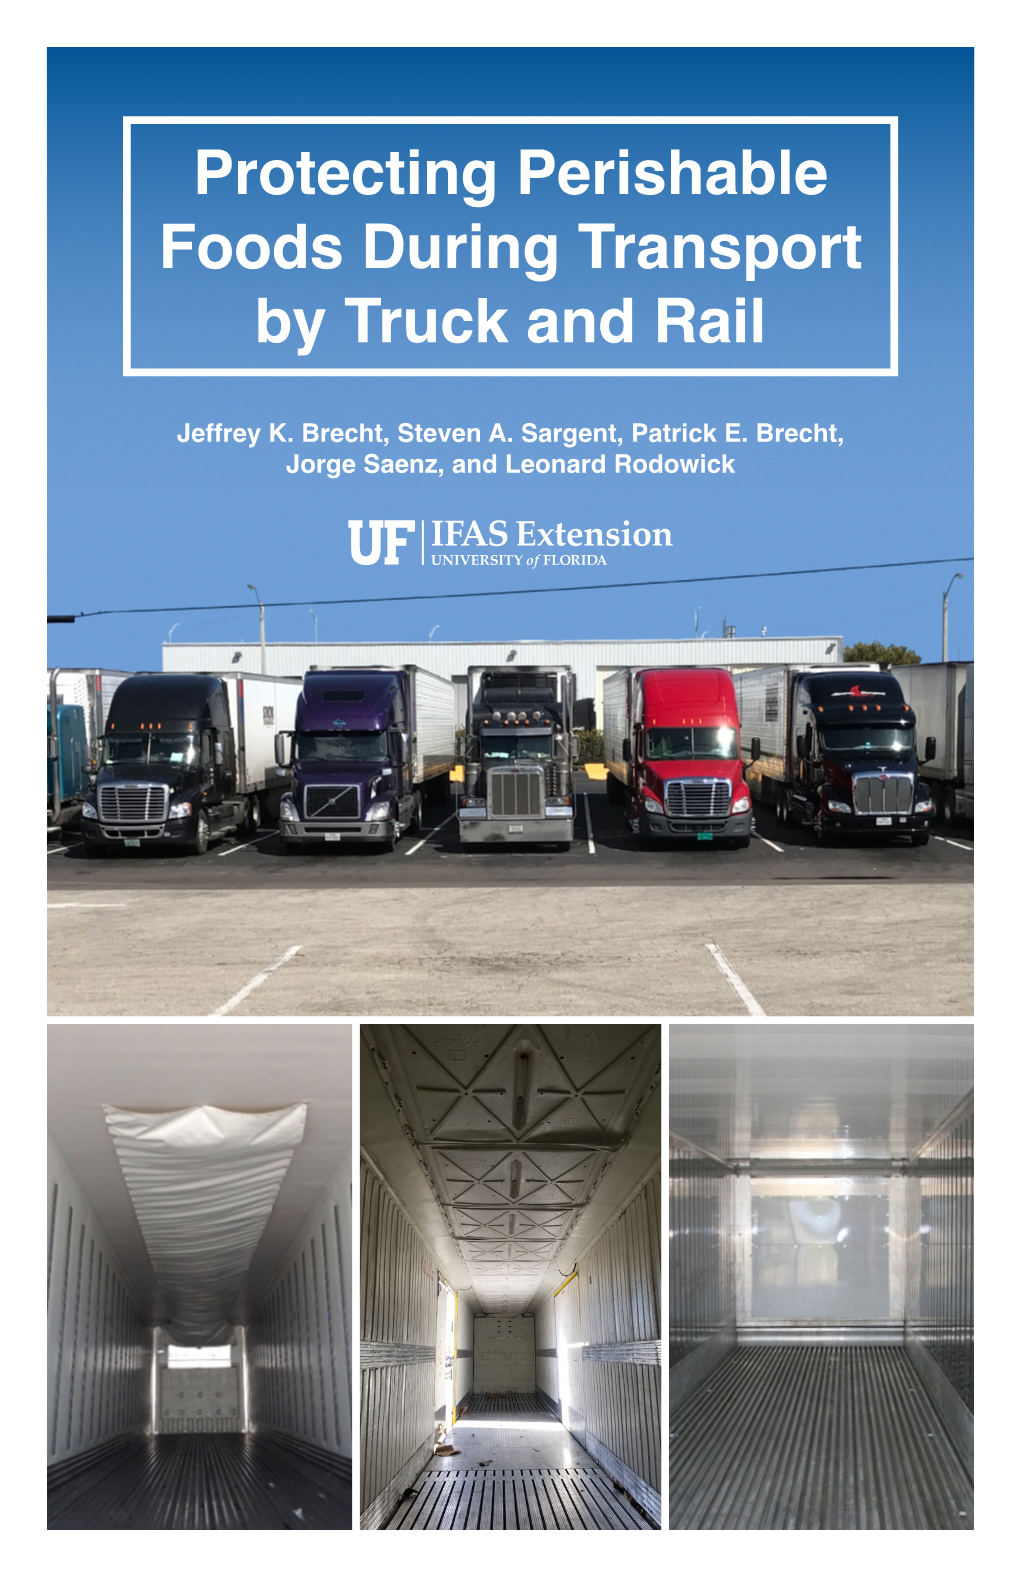 Protecting Perishable Foods During Transport by Truck and Rail